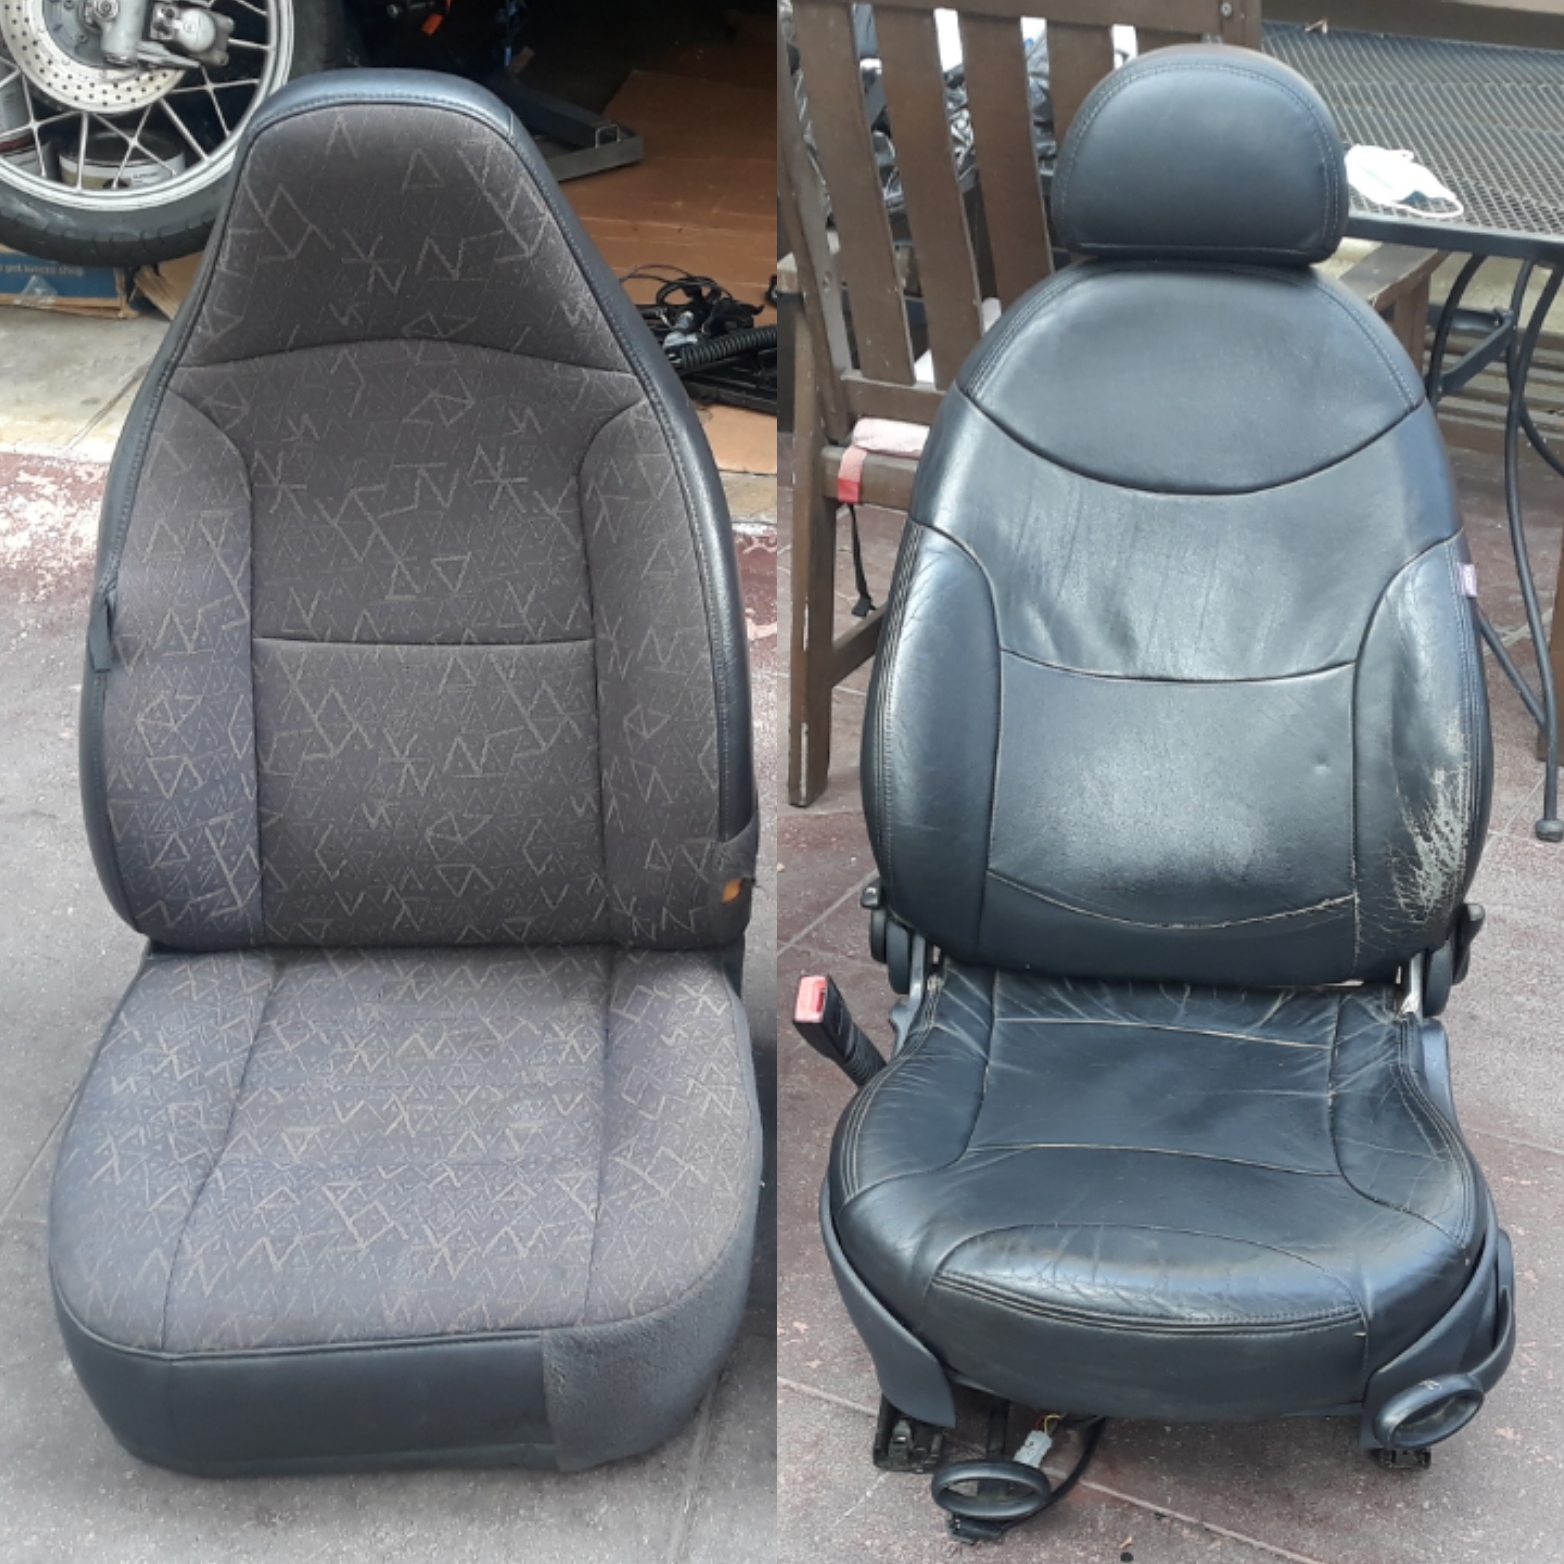 Seat reupholstery or replacement options | Jeep Wrangler TJ Forum